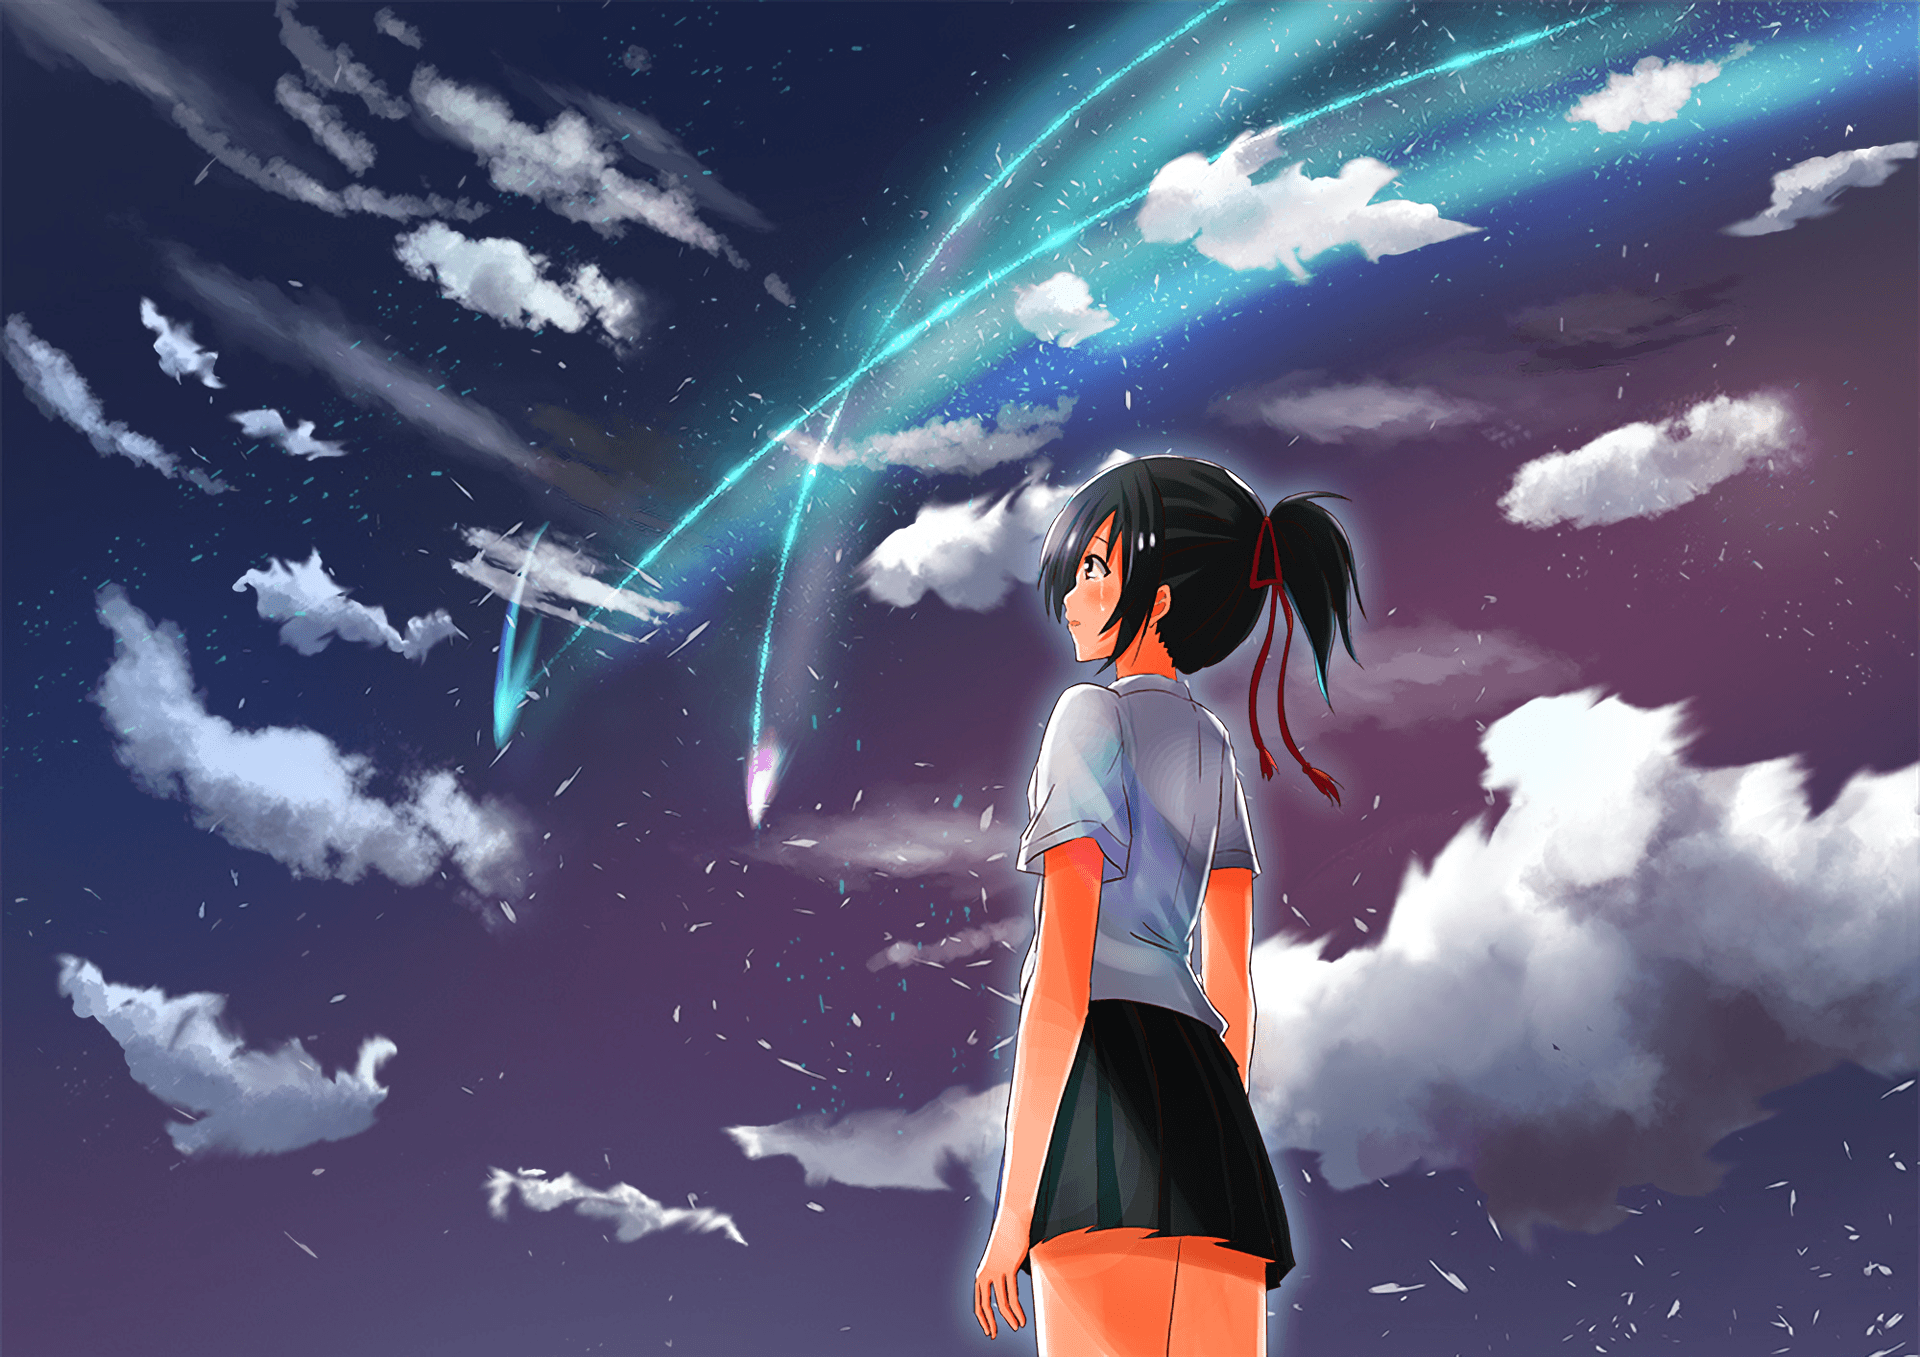 Your Name Anime HD Wallpapers - Wallpaper Cave